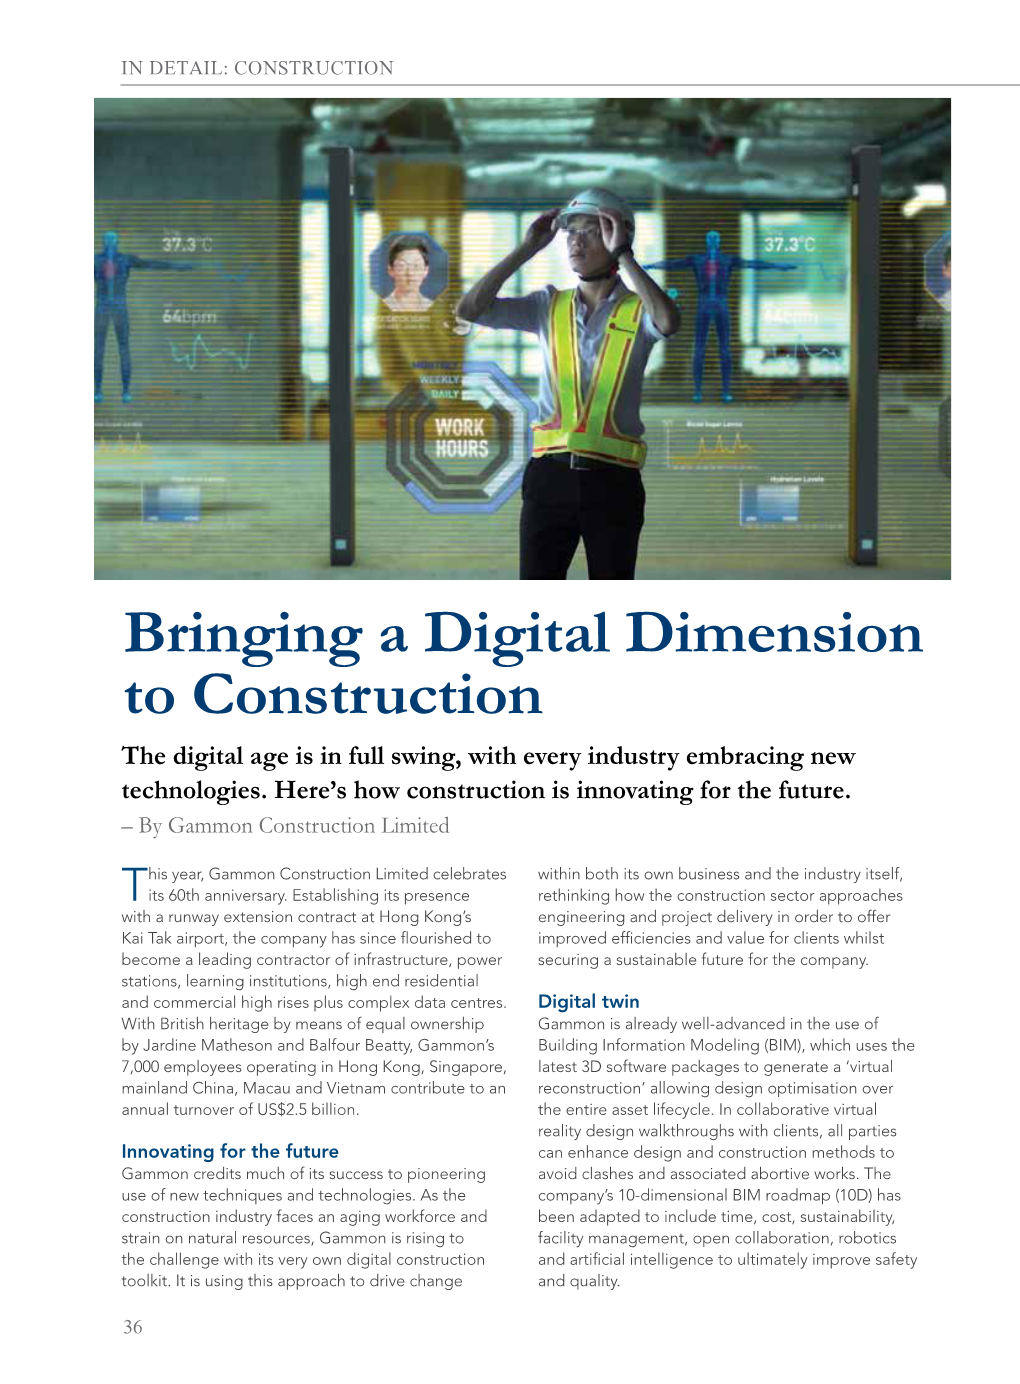 Bringing a Digital Dimension to Construction the Digital Age Is in Full Swing, with Every Industry Embracing New Technologies